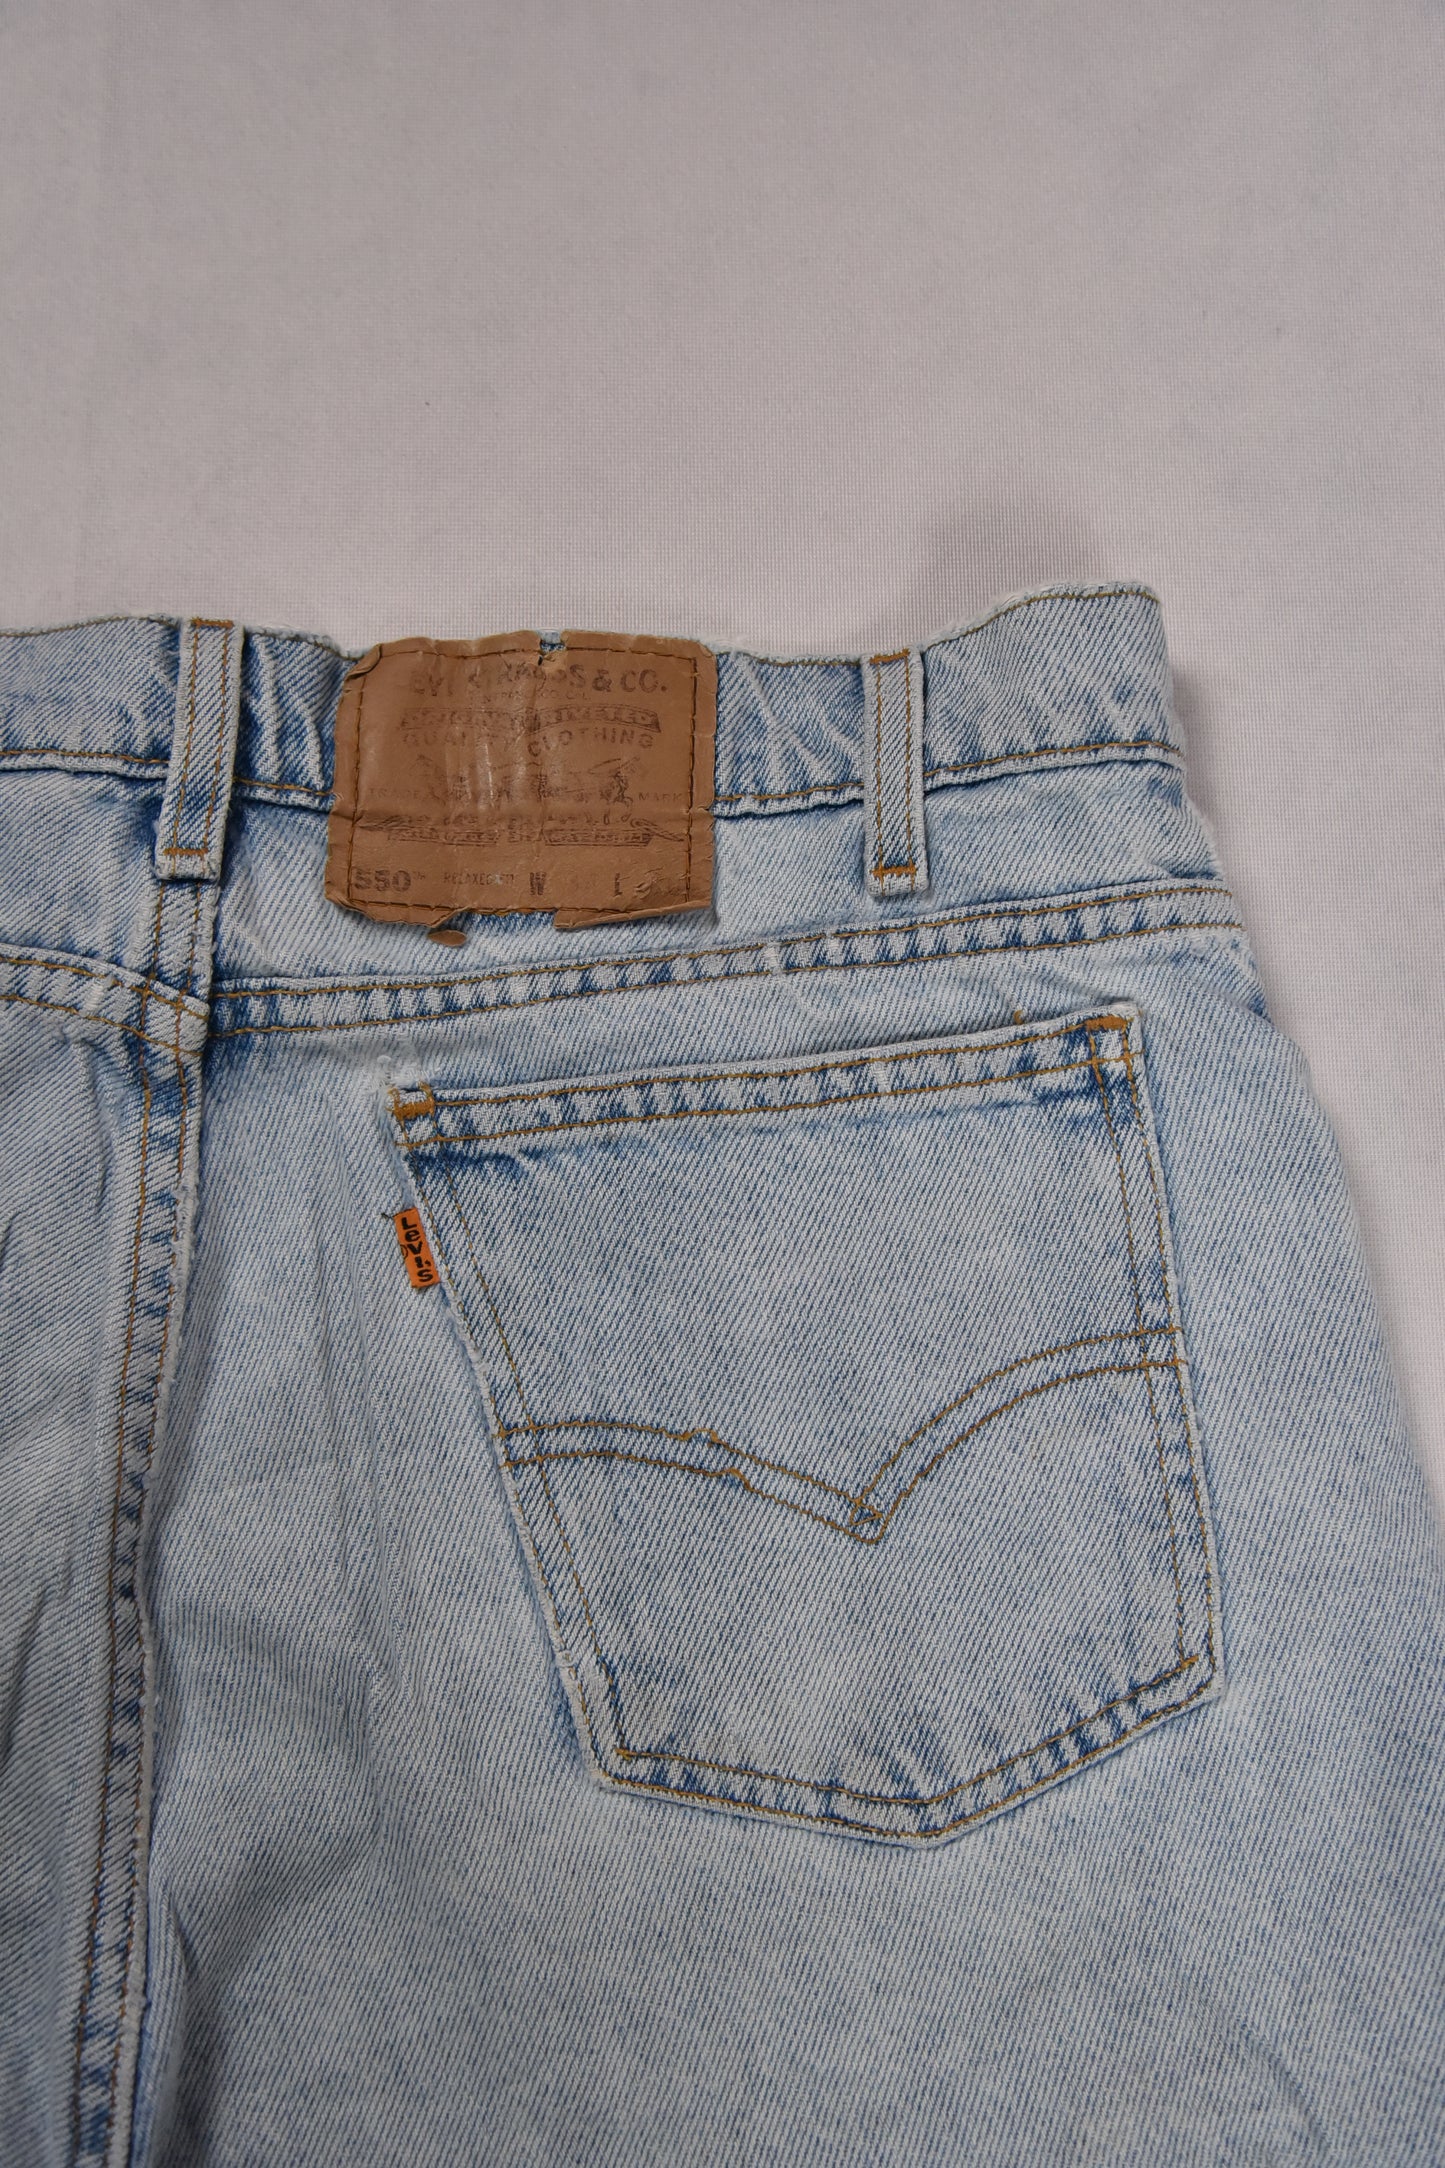 Levi's 550 Orange Tab Cropped Jeans Made in USA Vintage / 34